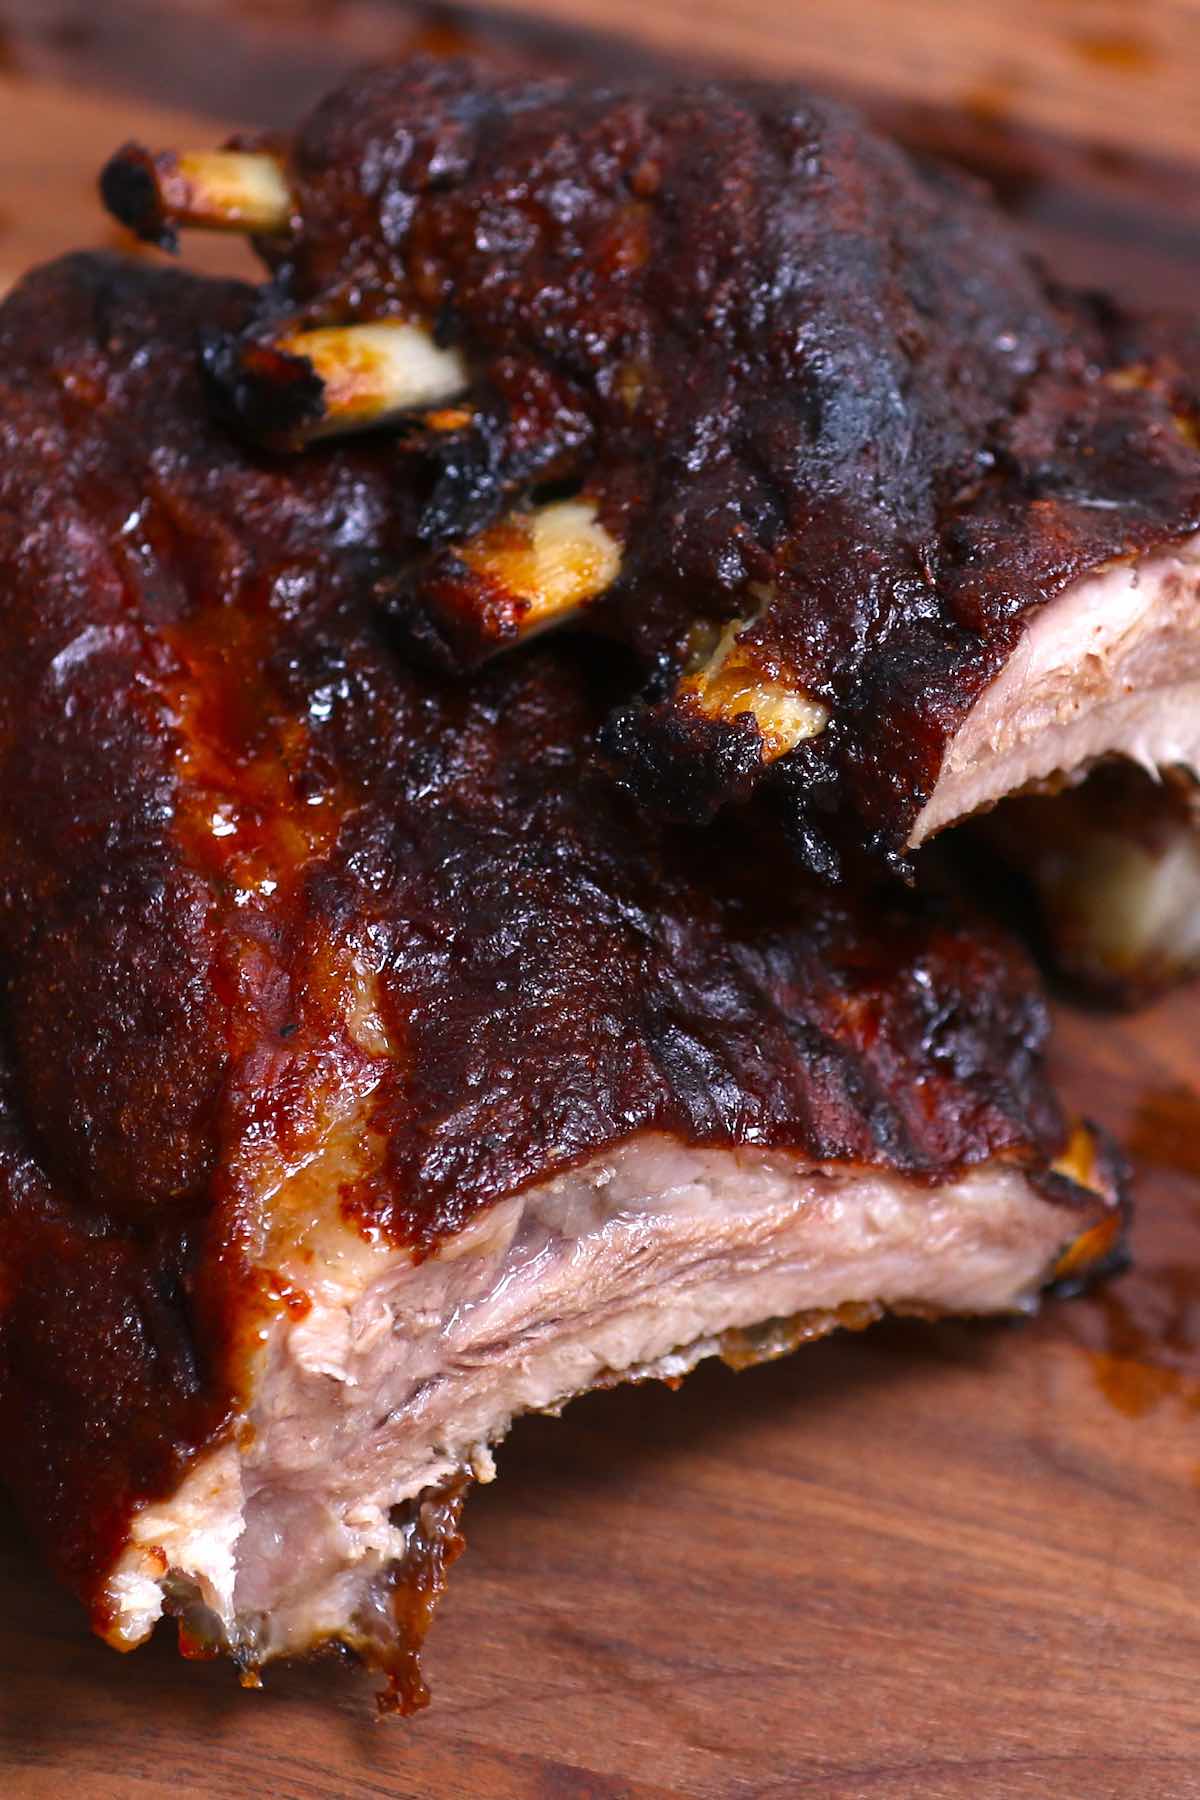 Cross-sectional closeup of 3 2 1 ribs showing juicy, tender meat and a set sauce on the outside